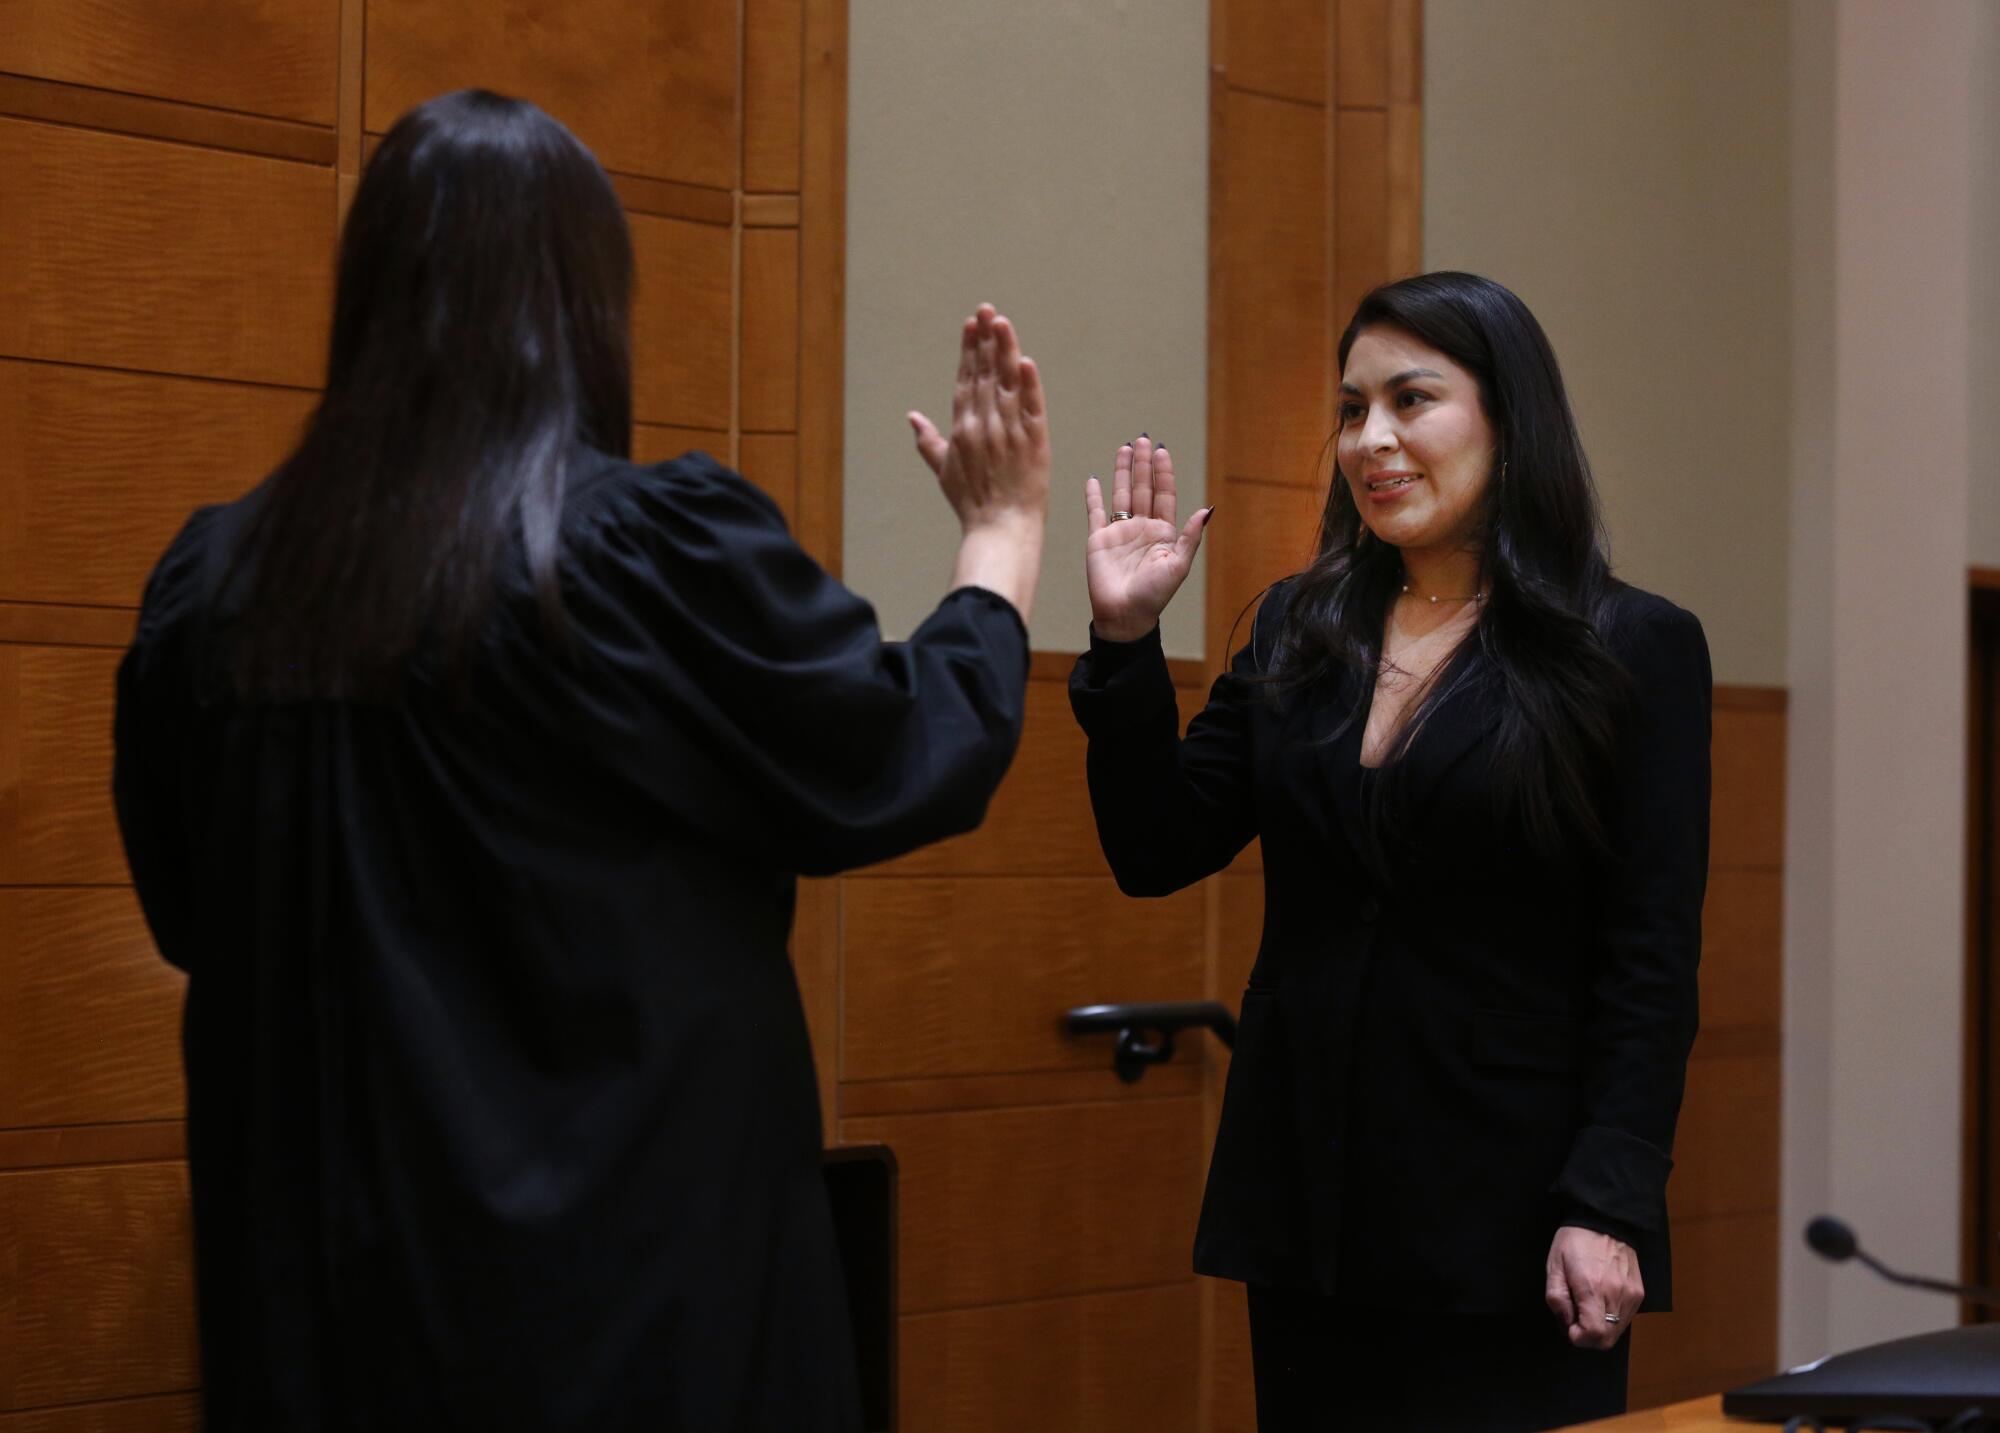 Jessenia Nunez, right, is sworn in at the Robert E. Coyle Federal Courthouse by Ana De Alba